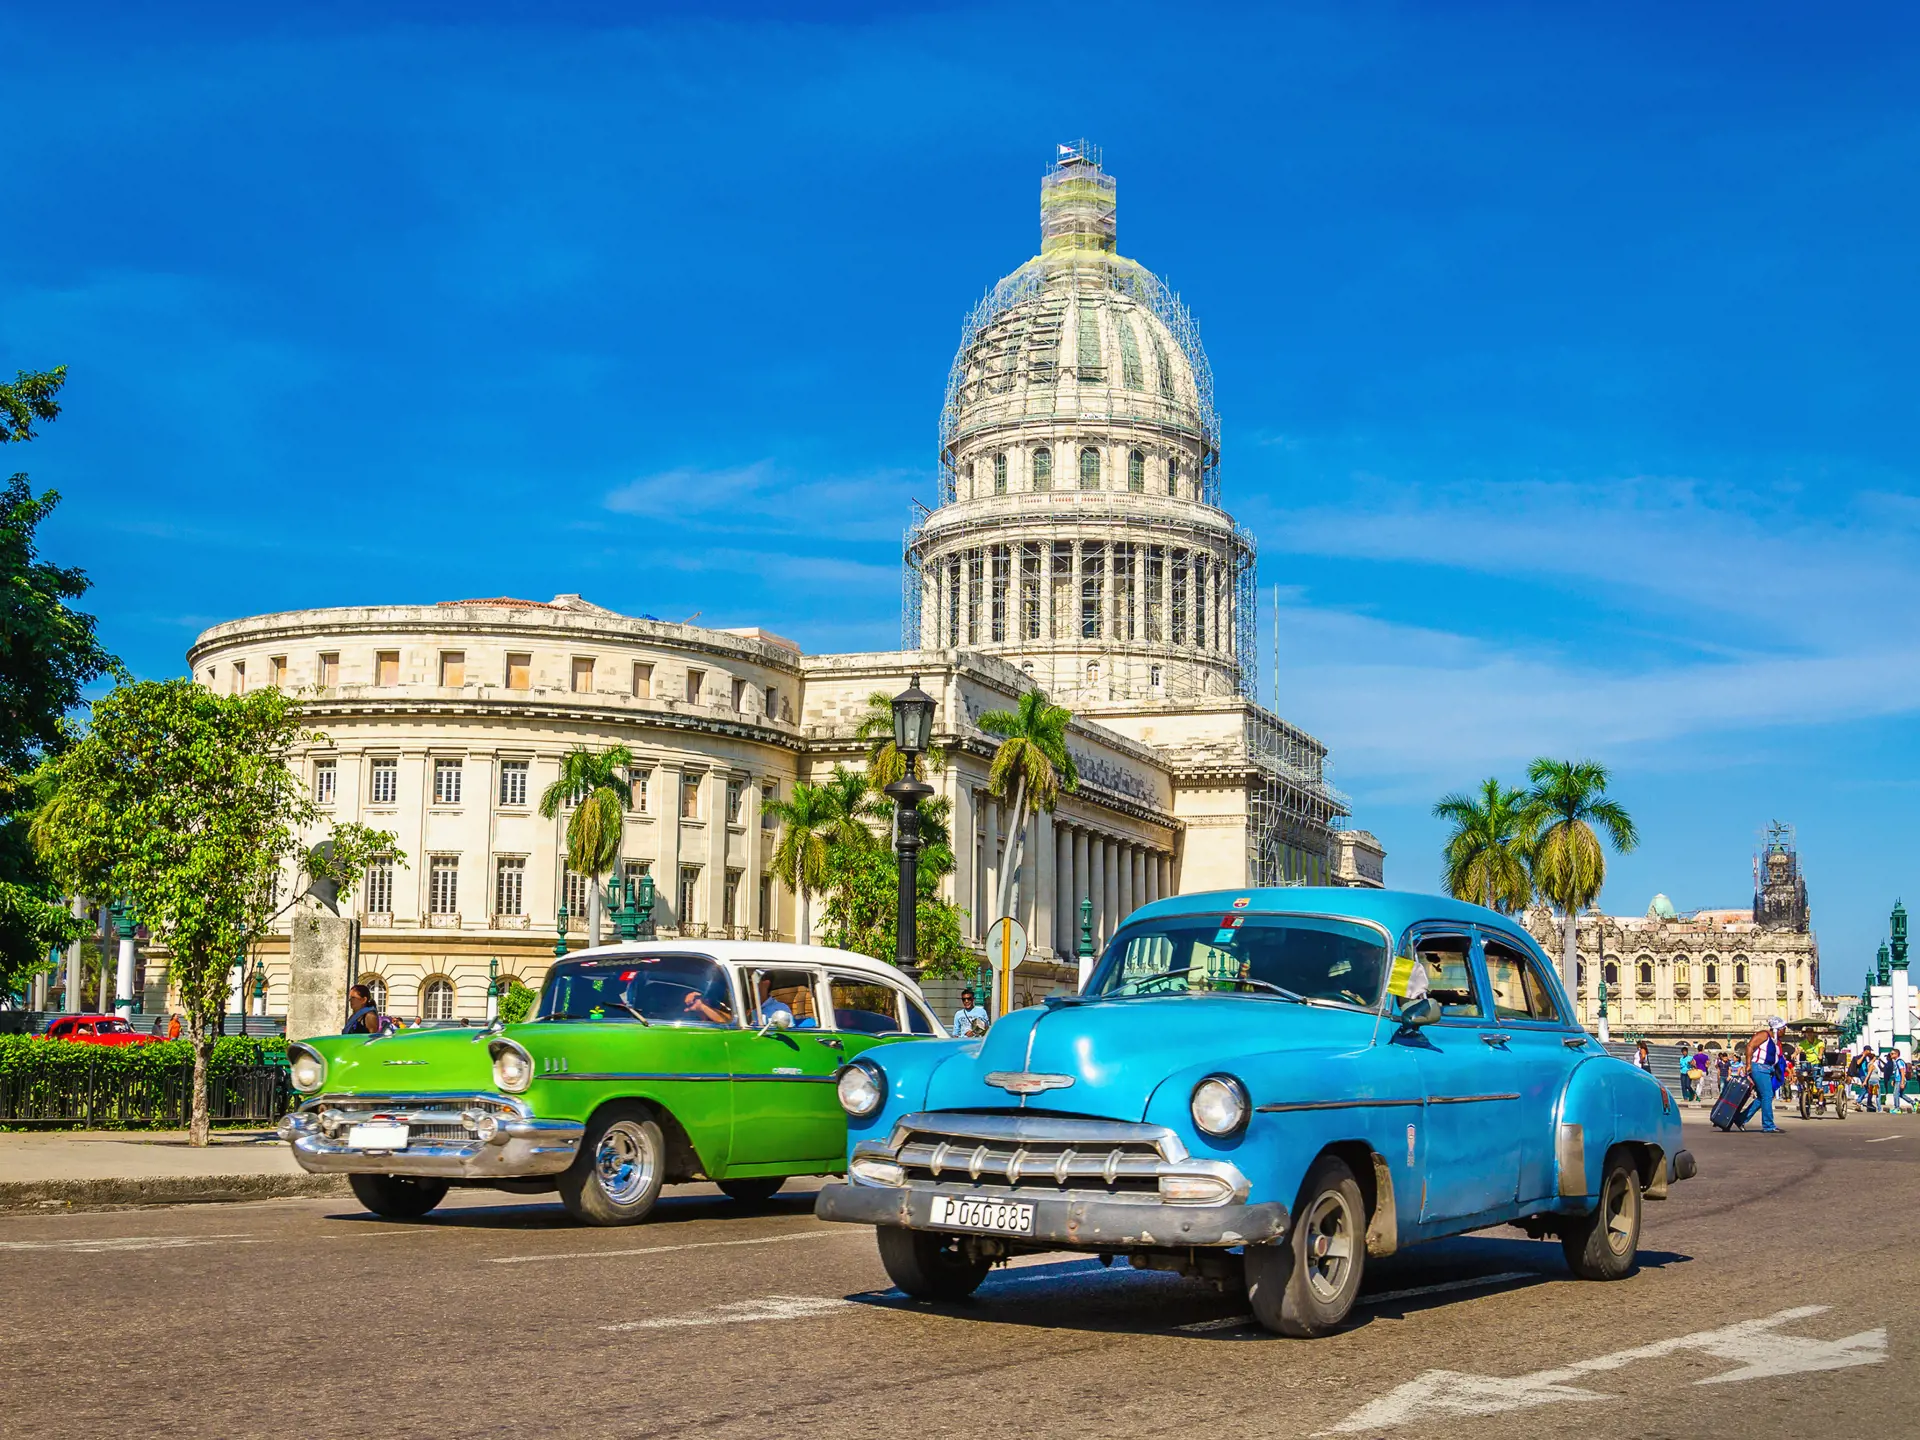 shutterstock_252314458 Old classic American cars rides in front of the Capitol..jpg